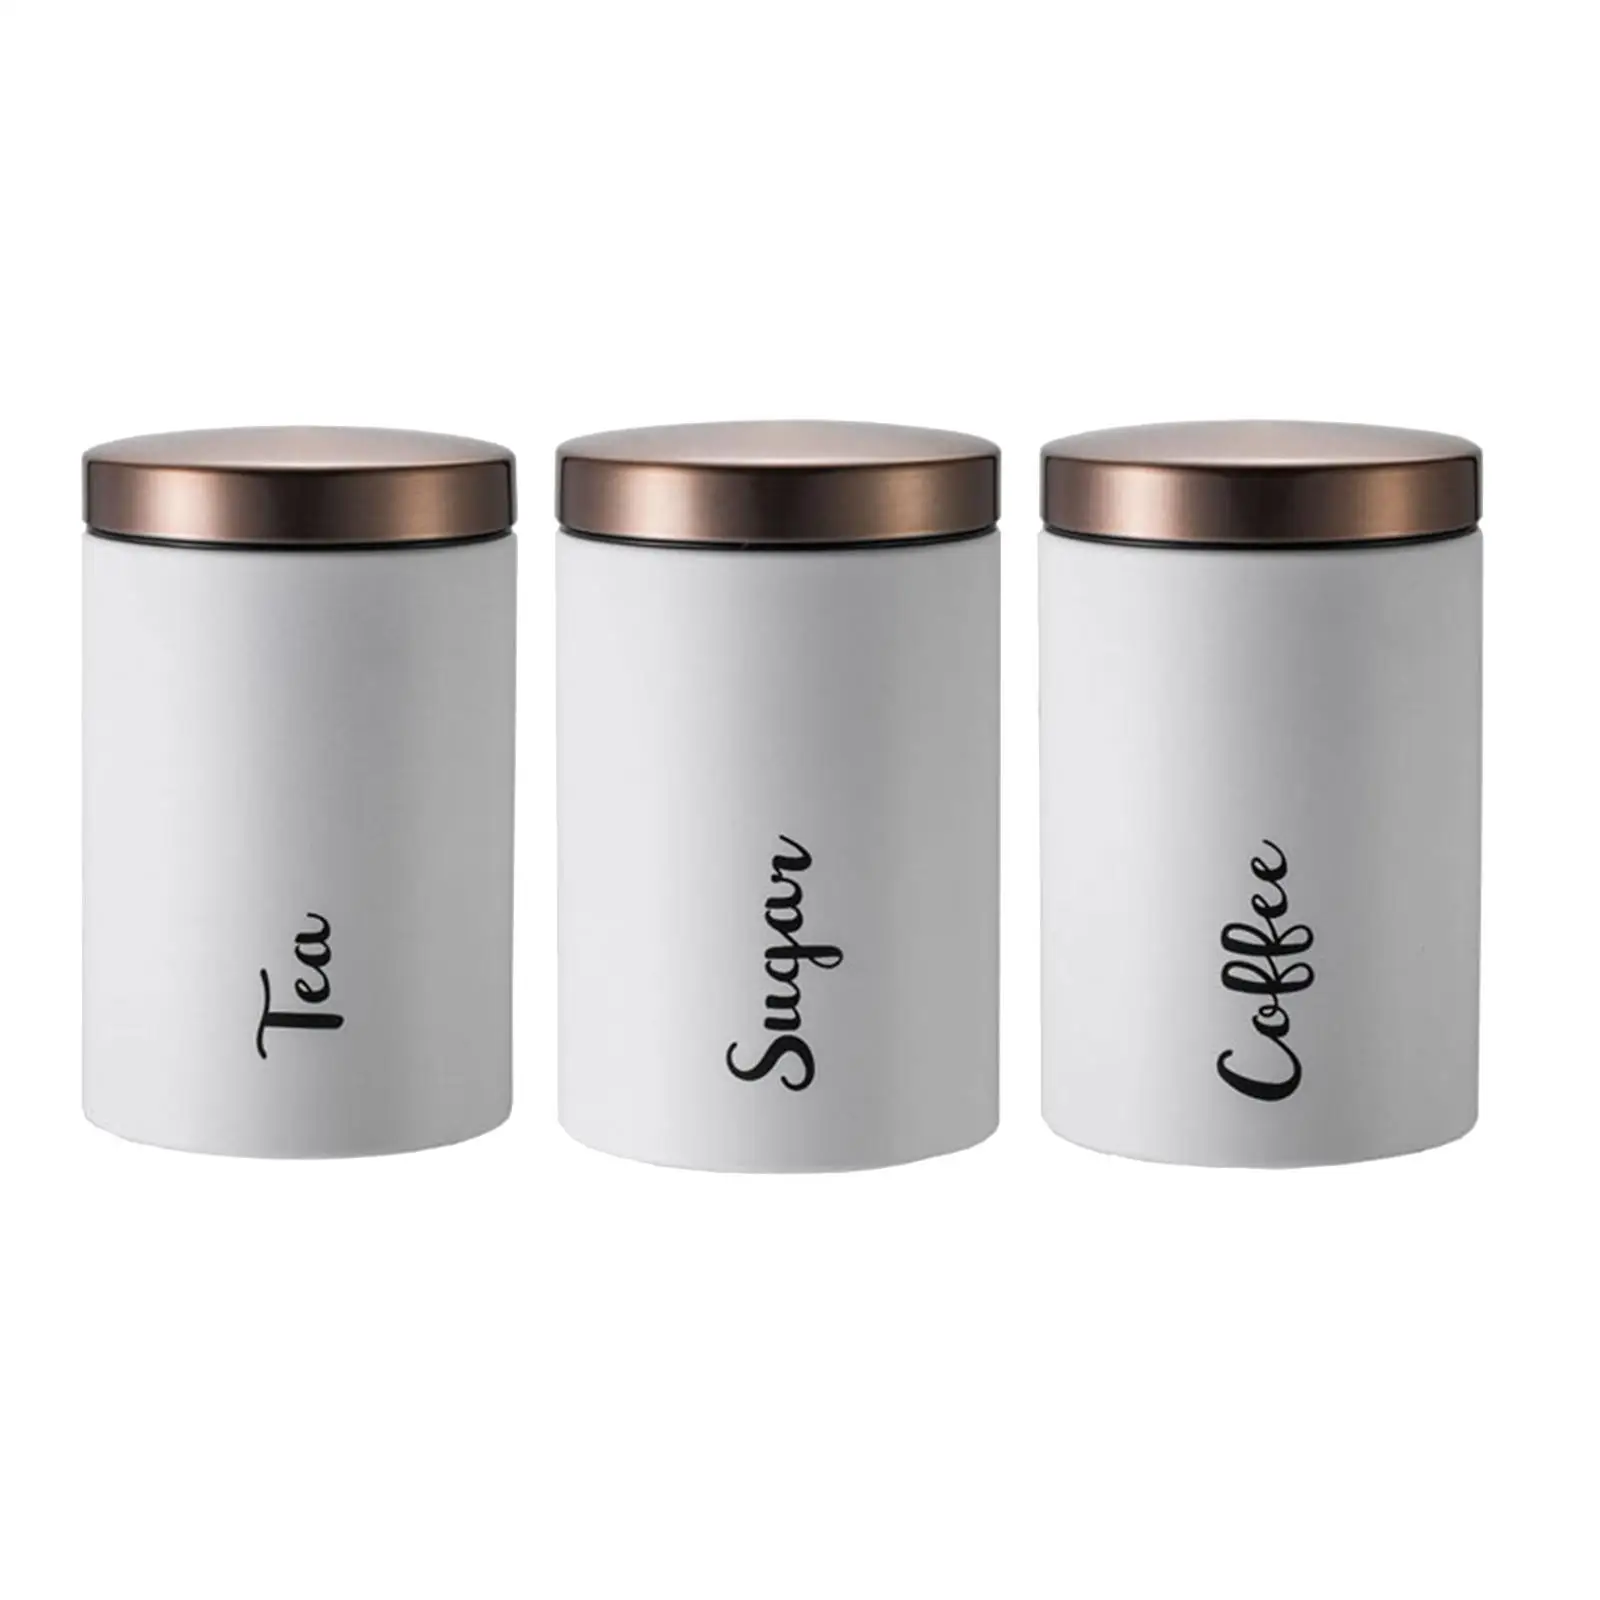 3x Stainless Steel Storage Jars Ornament Dustproof Containers Organizer for Living Room Desk Cabinet Pantry Closet